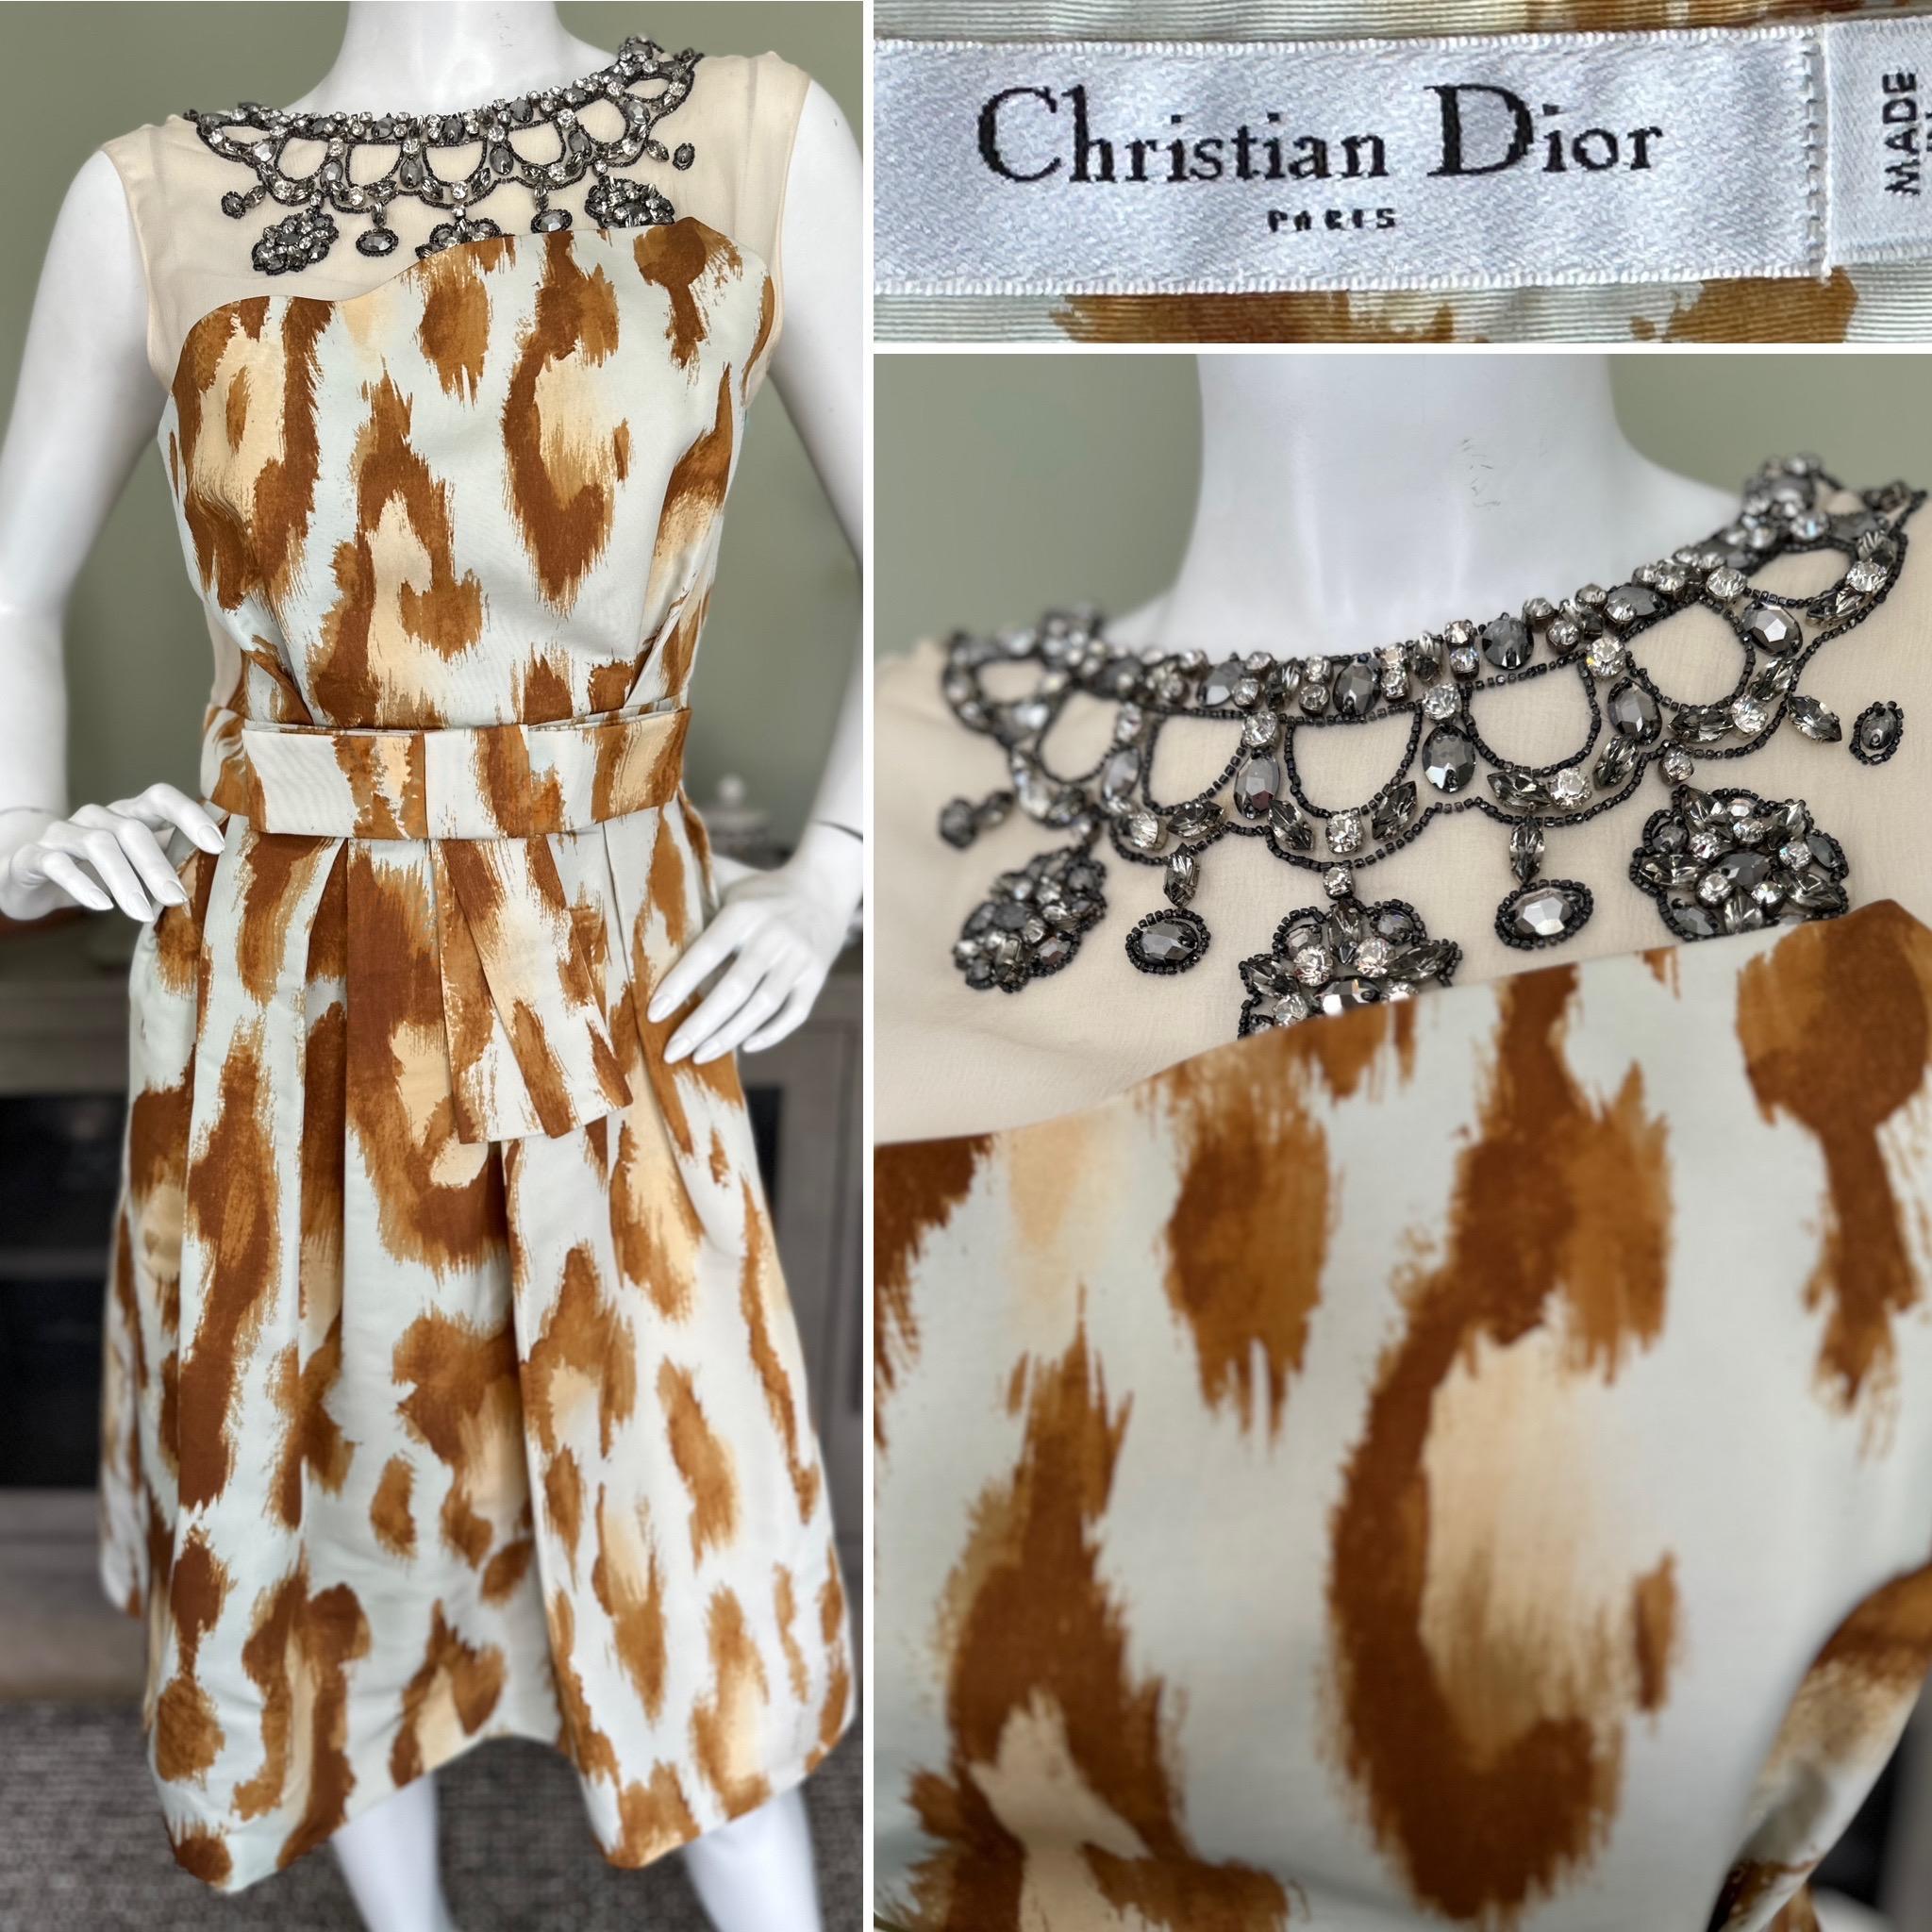 Dior by Galliano Silk Leopard Print Cocktail Dress with Lesage Jeweled Necklace
This is so pretty, the bead work is astonishing.
Size 40
Bust 36